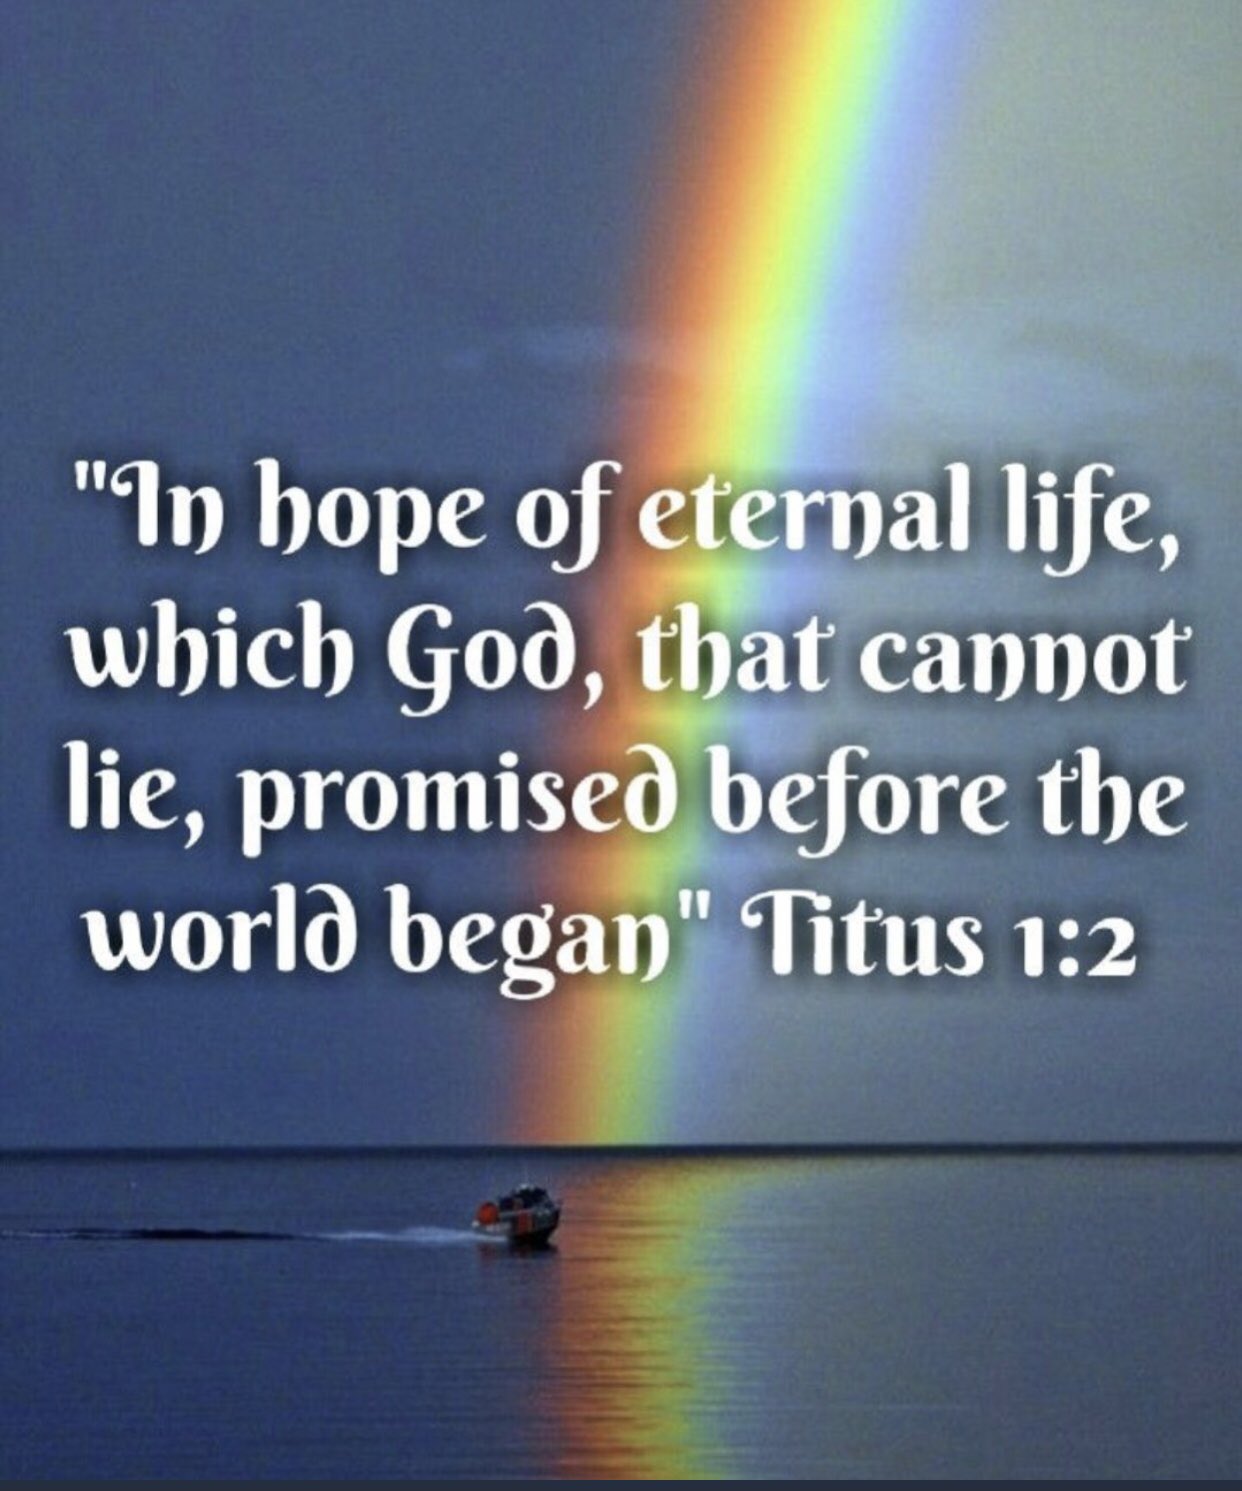 "In hope 0f eternal life, which God, that cannot lie, promised before the world began" Titus 1:2